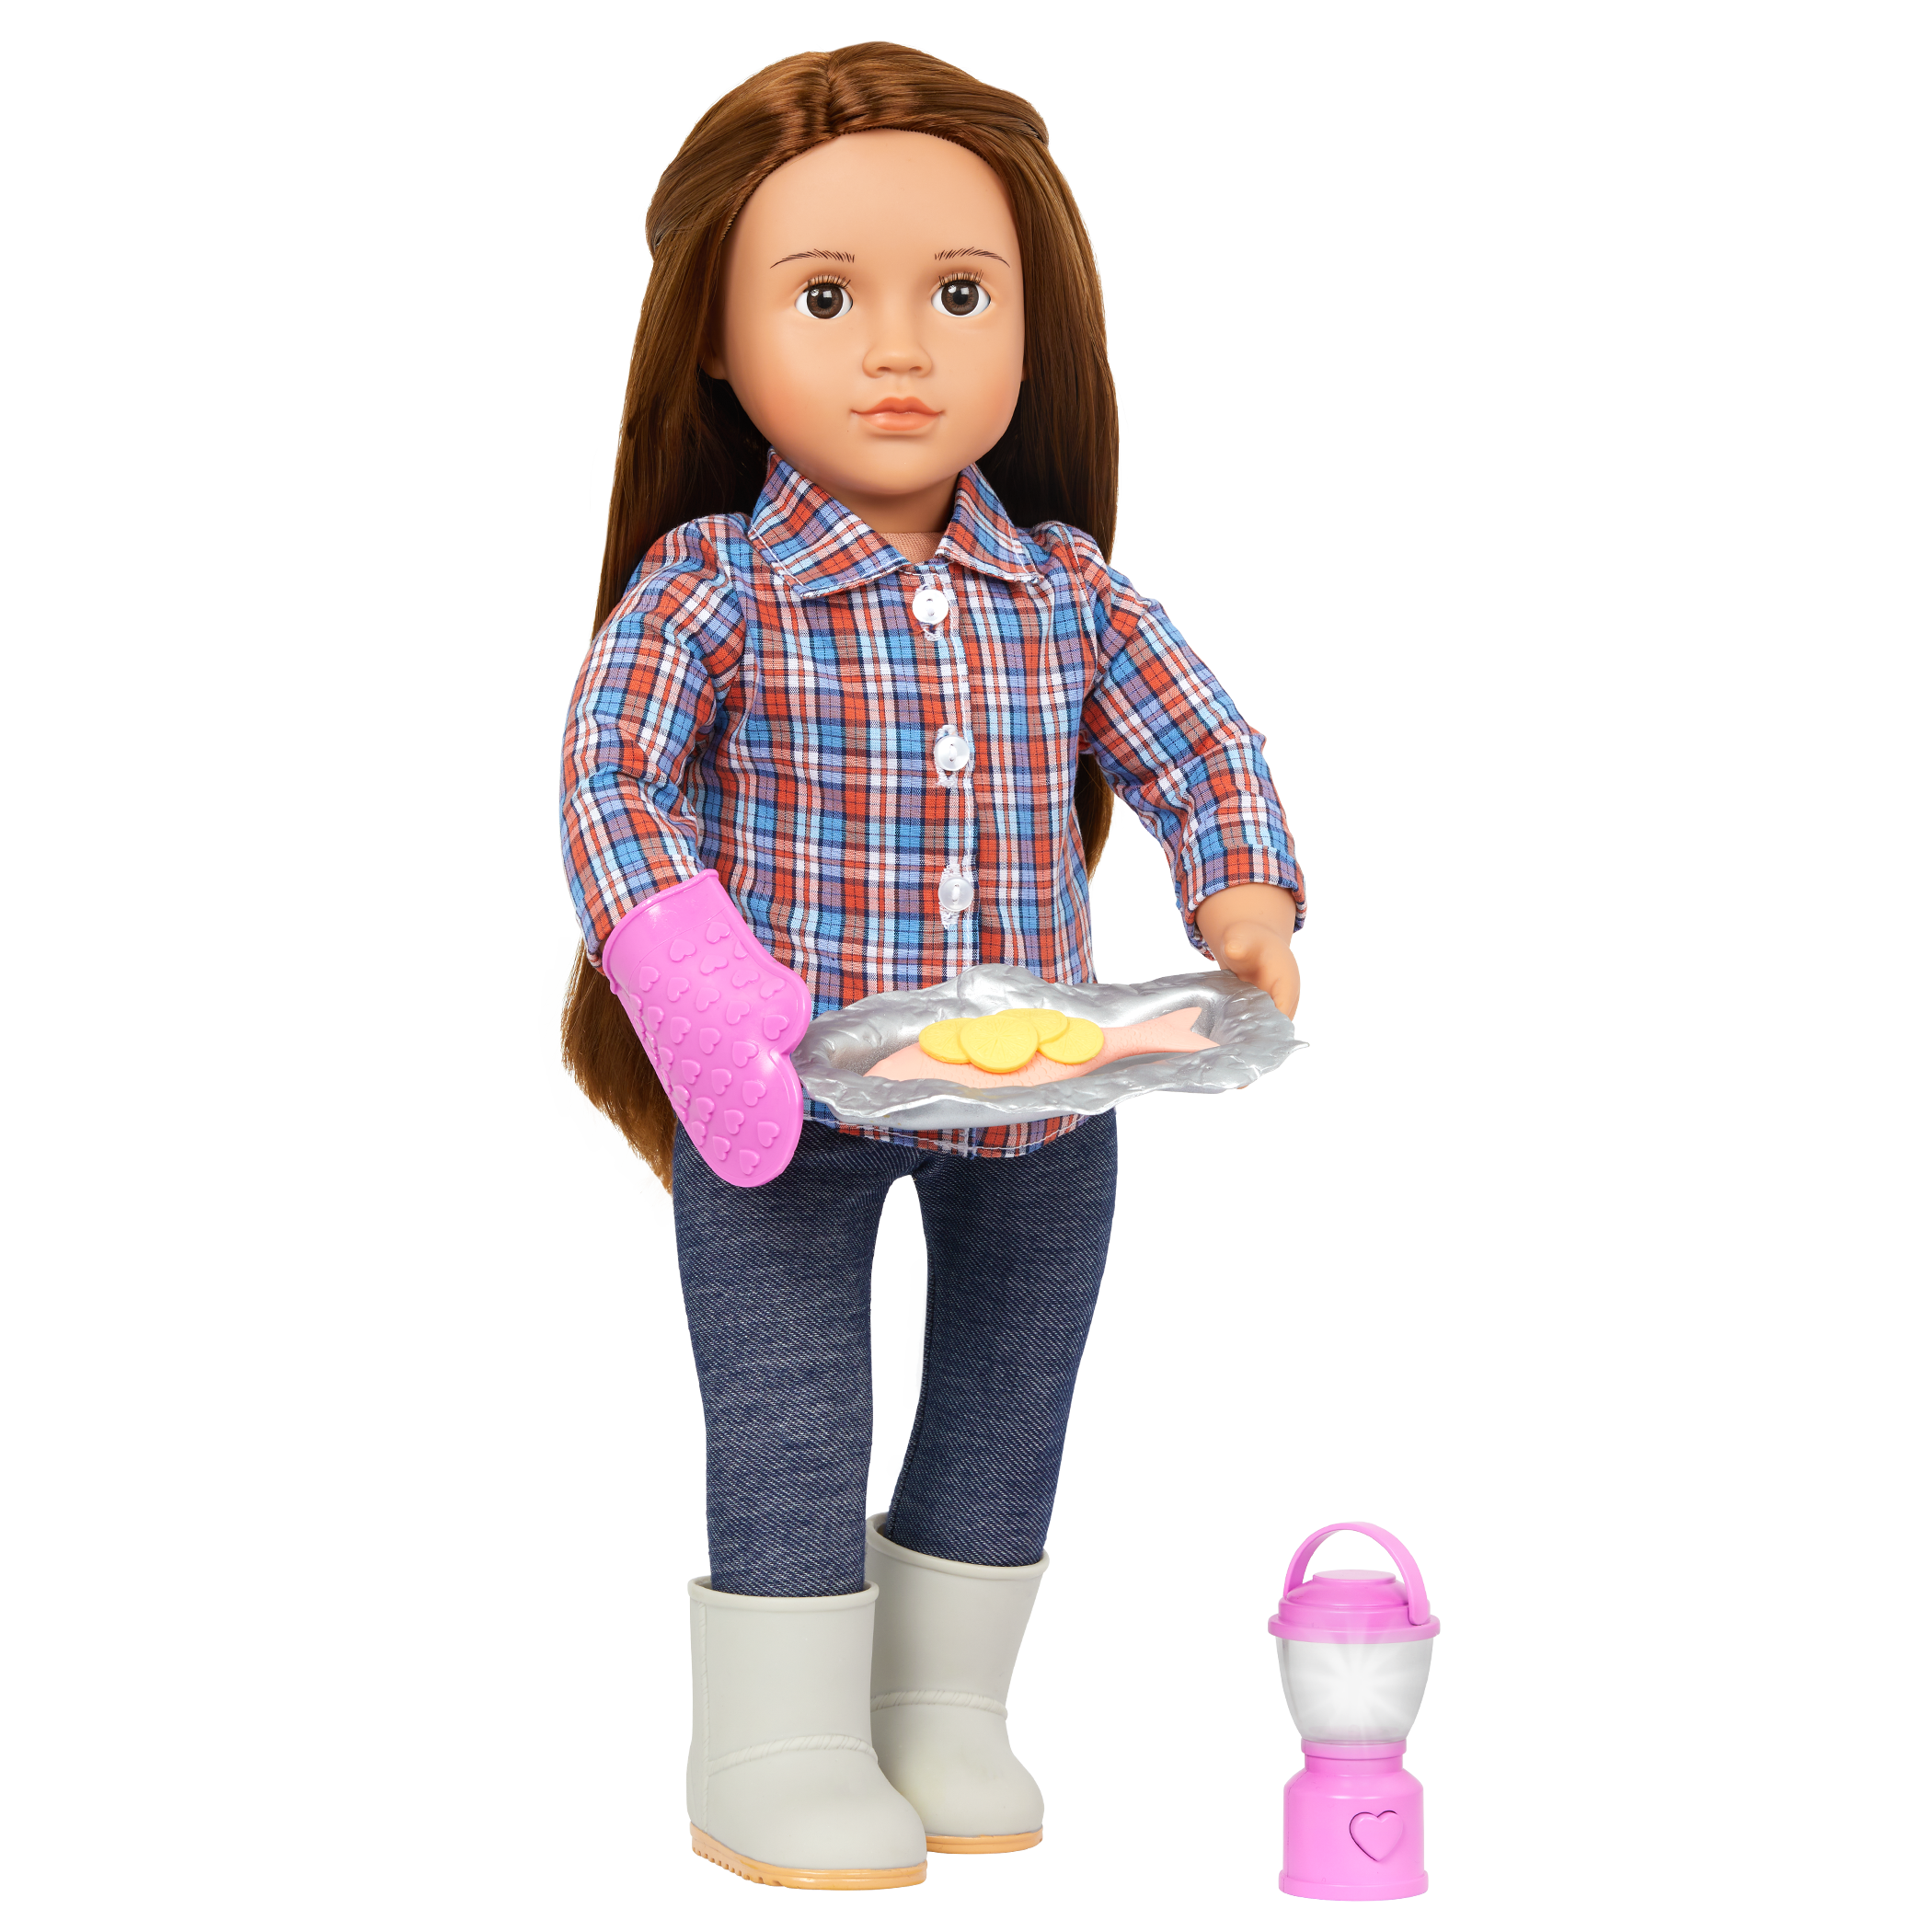 Our Generation Campfire Cookout Play Food Set for 18-inch Dolls